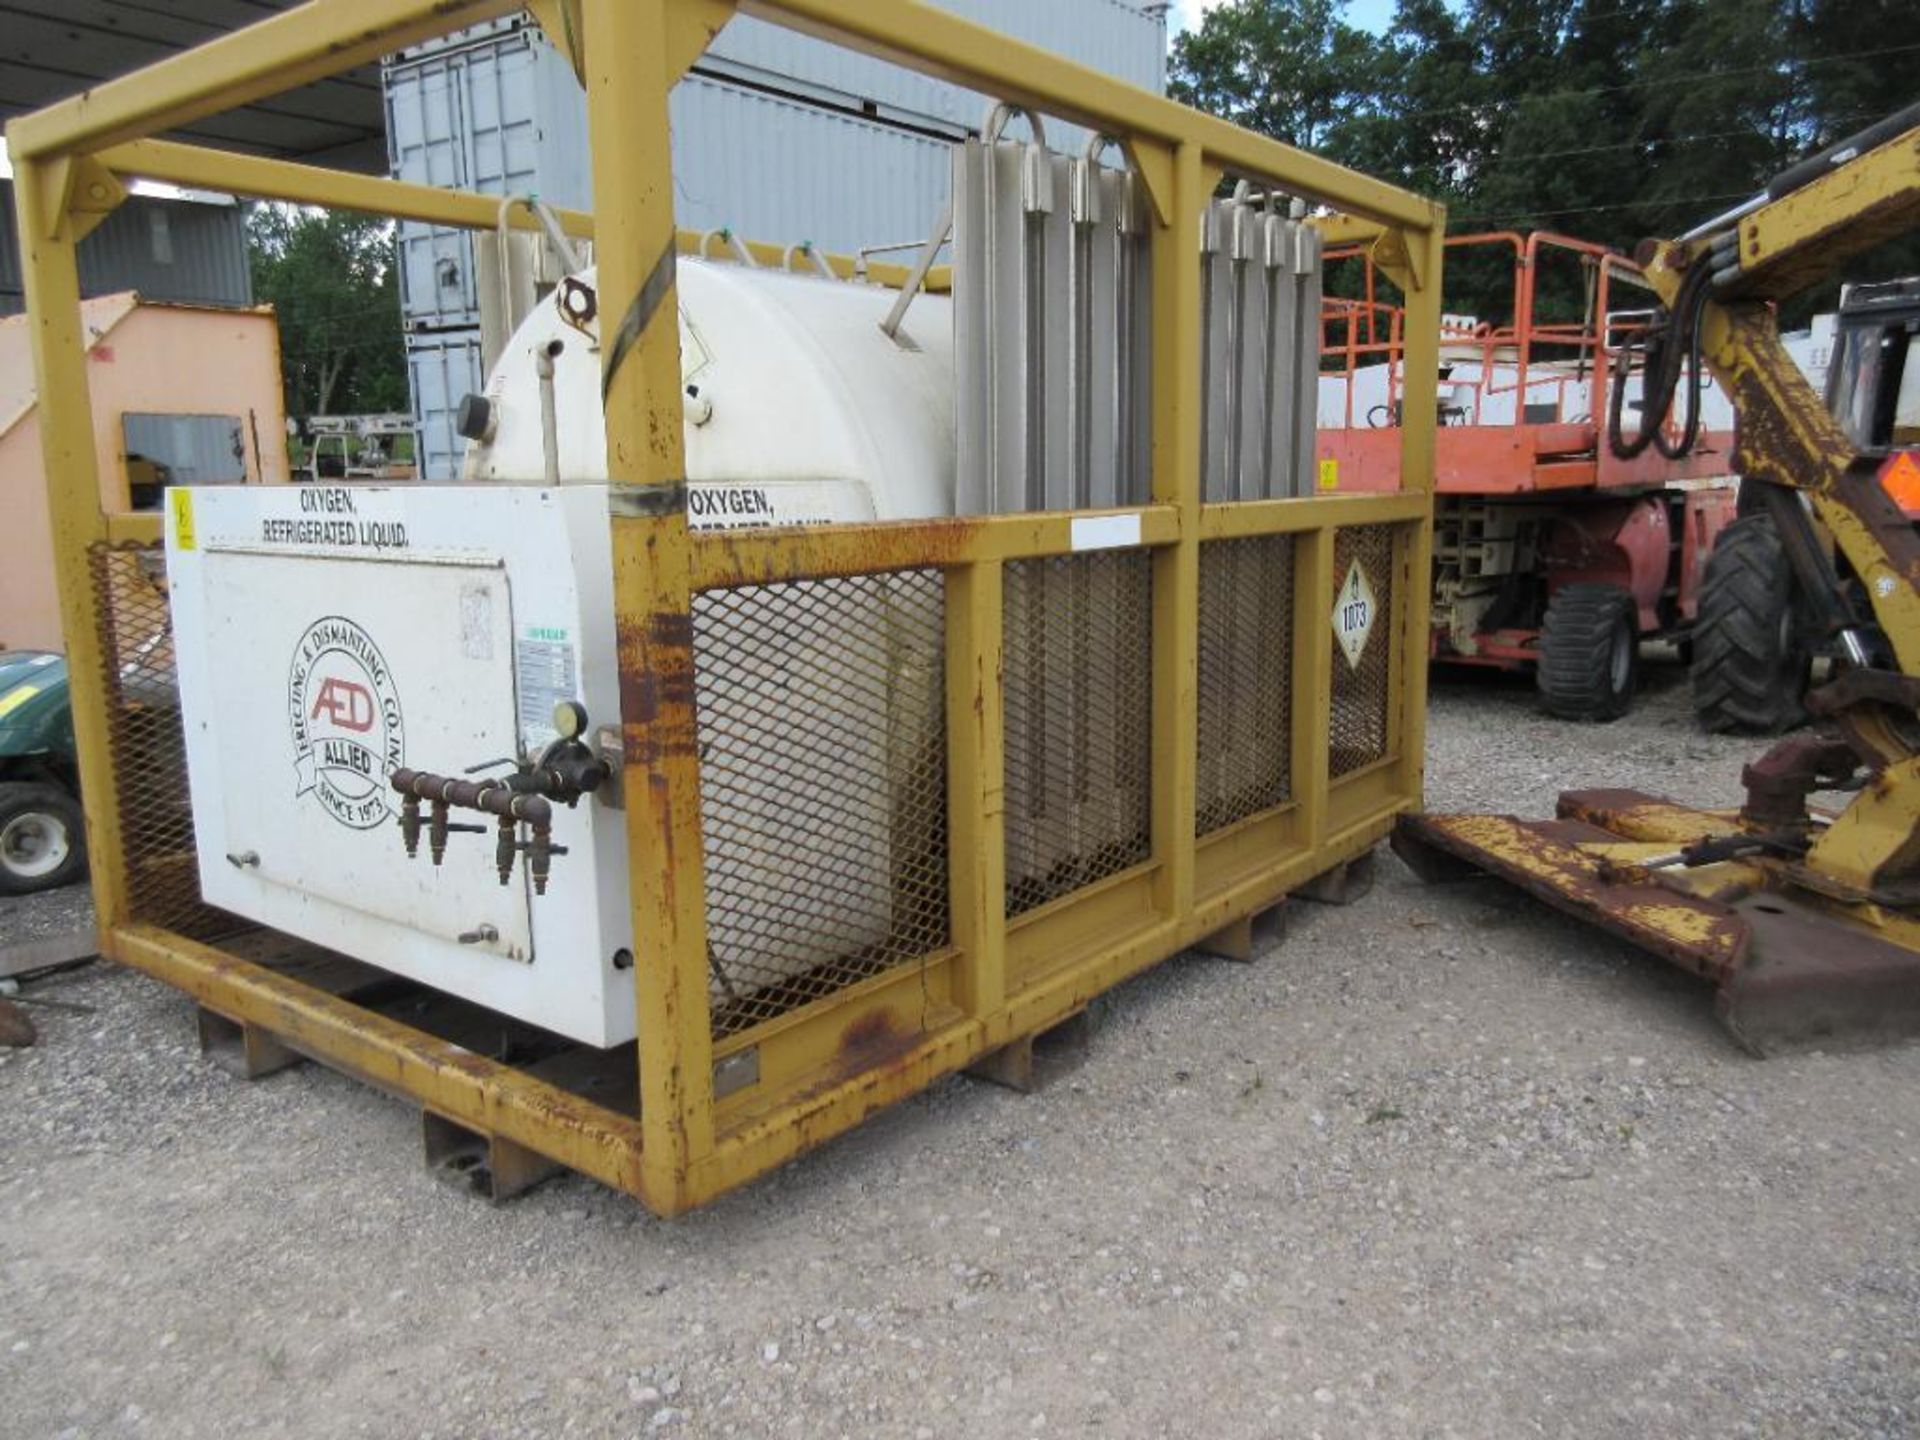 PRAXAIR LIQUID OXYGEN TO GAS REGENERATOR MOUNTED OF PORTABLE STEEL SLED CAGE, 120 PSIG, A FILL - Image 2 of 8